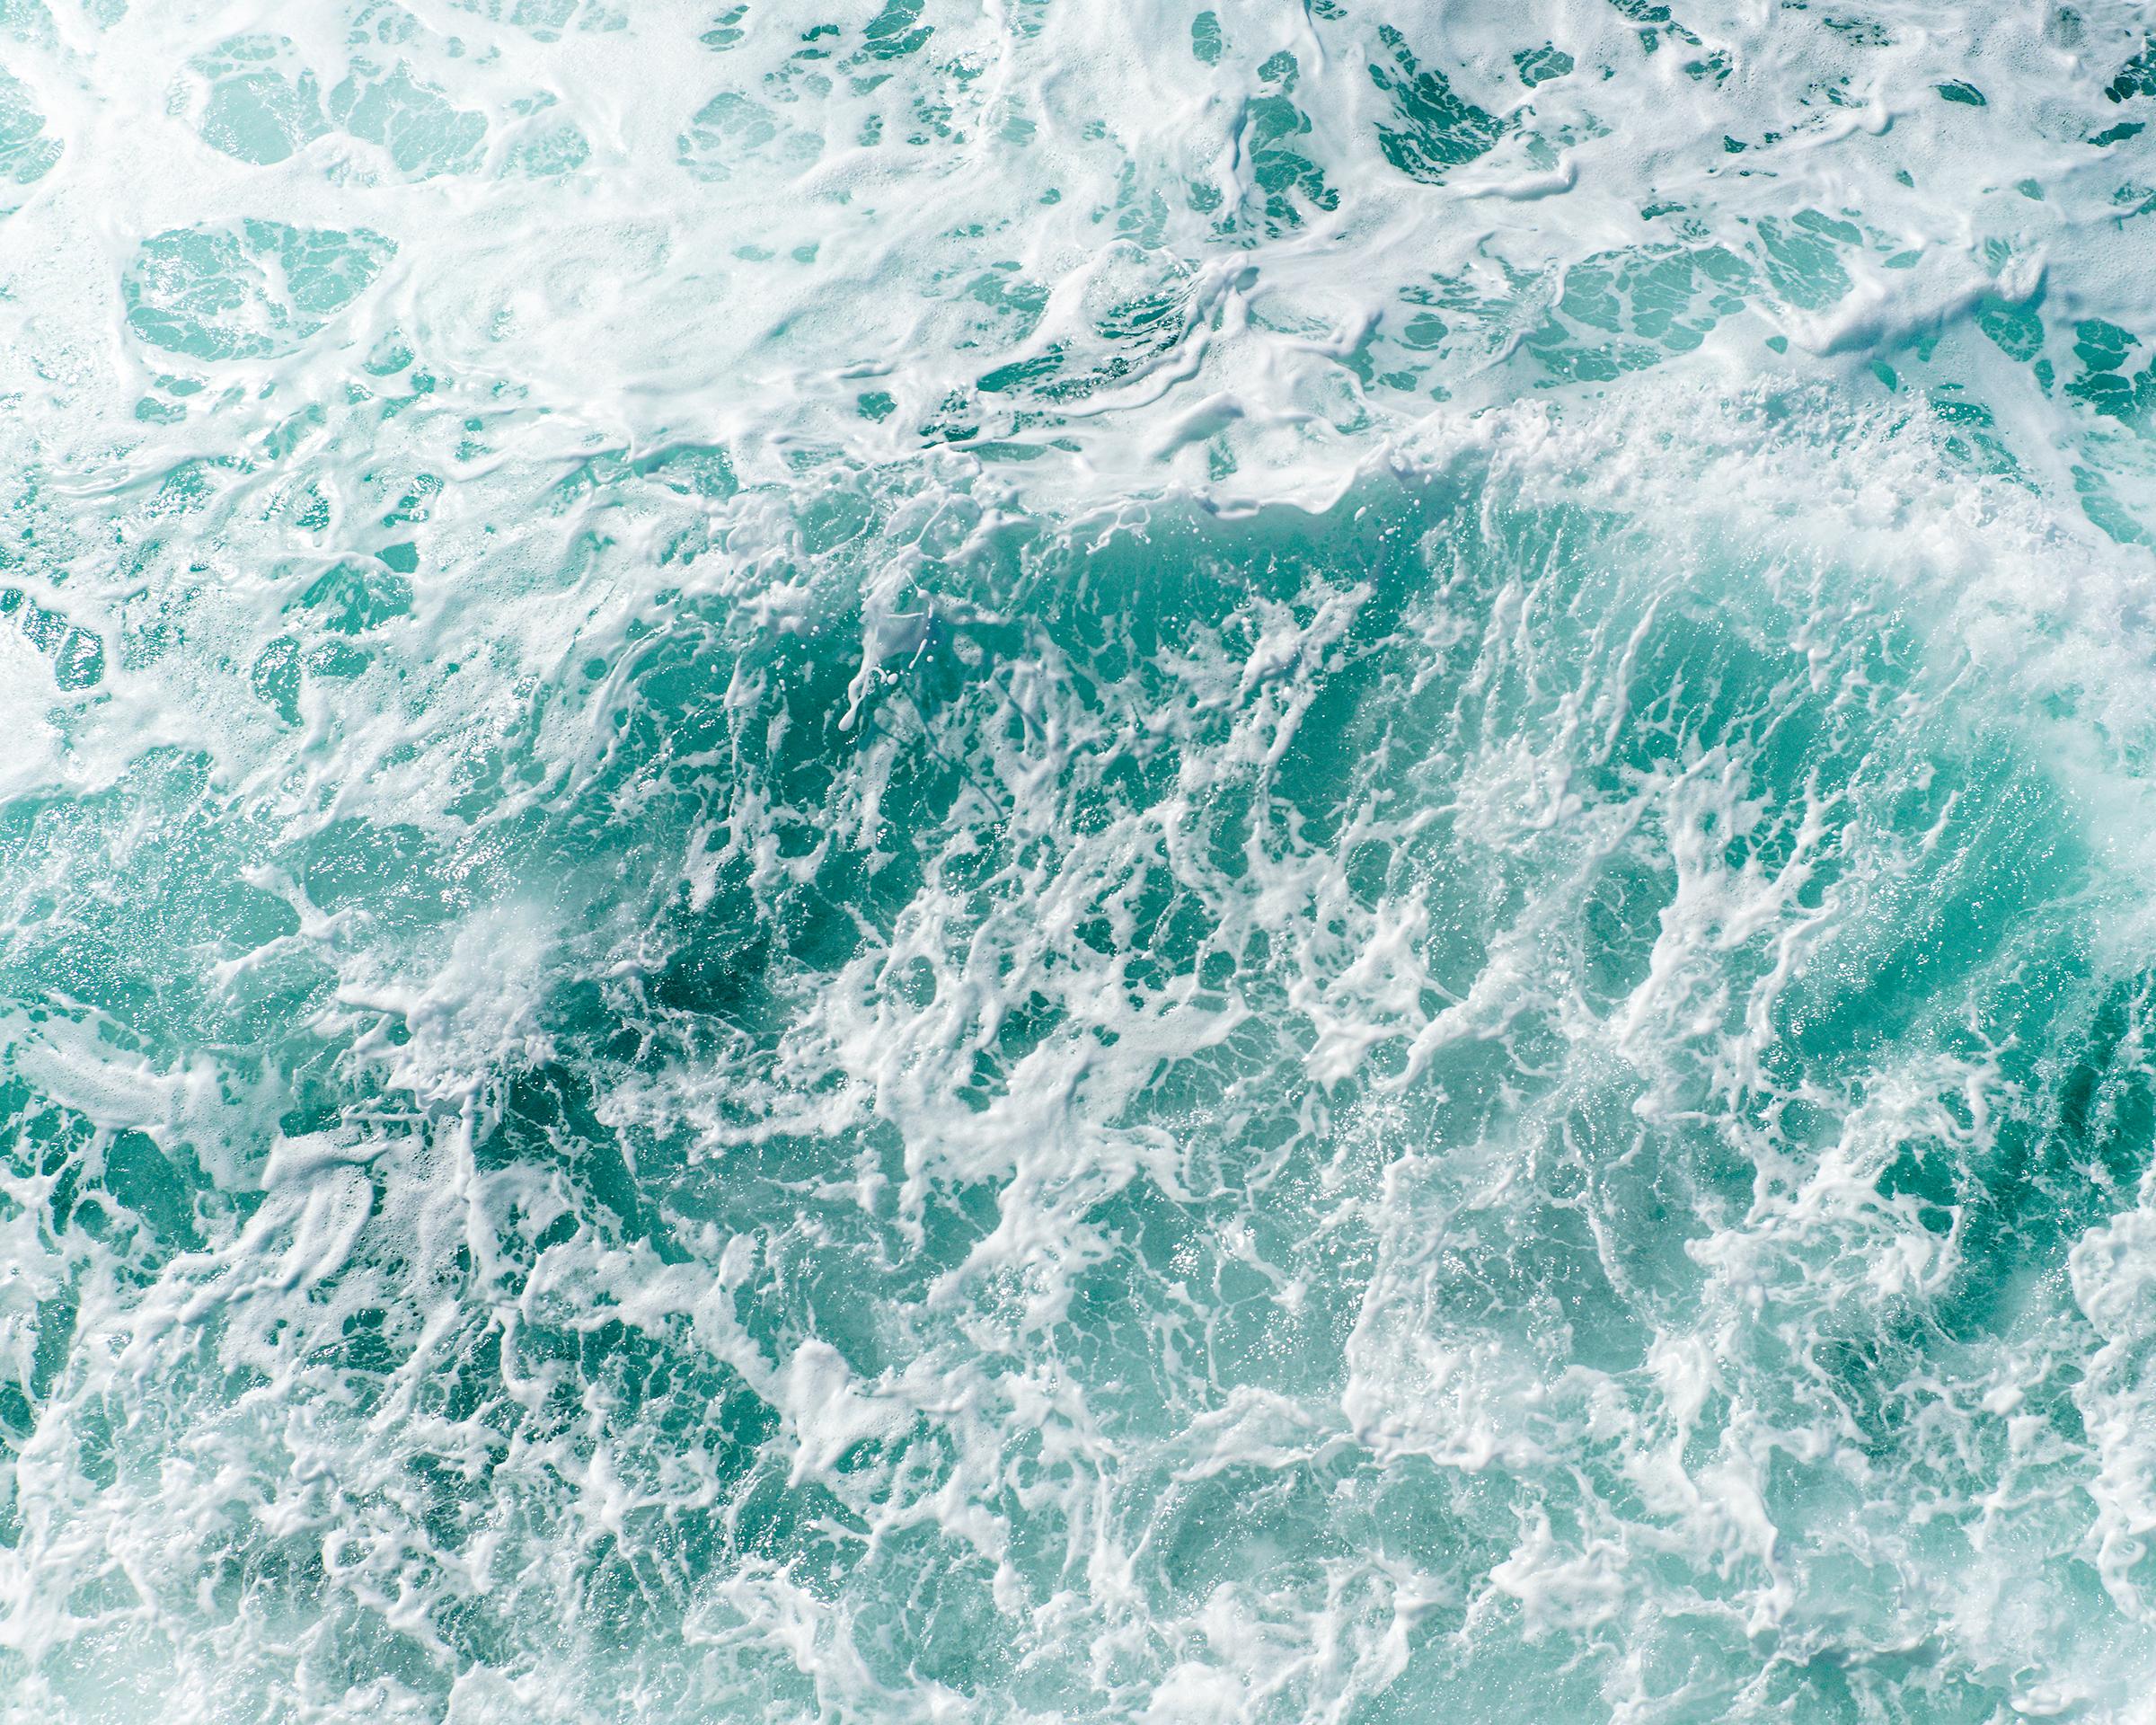 Tommy Kwak Color Photograph - "Waves 10" - contemporary photograph, nature